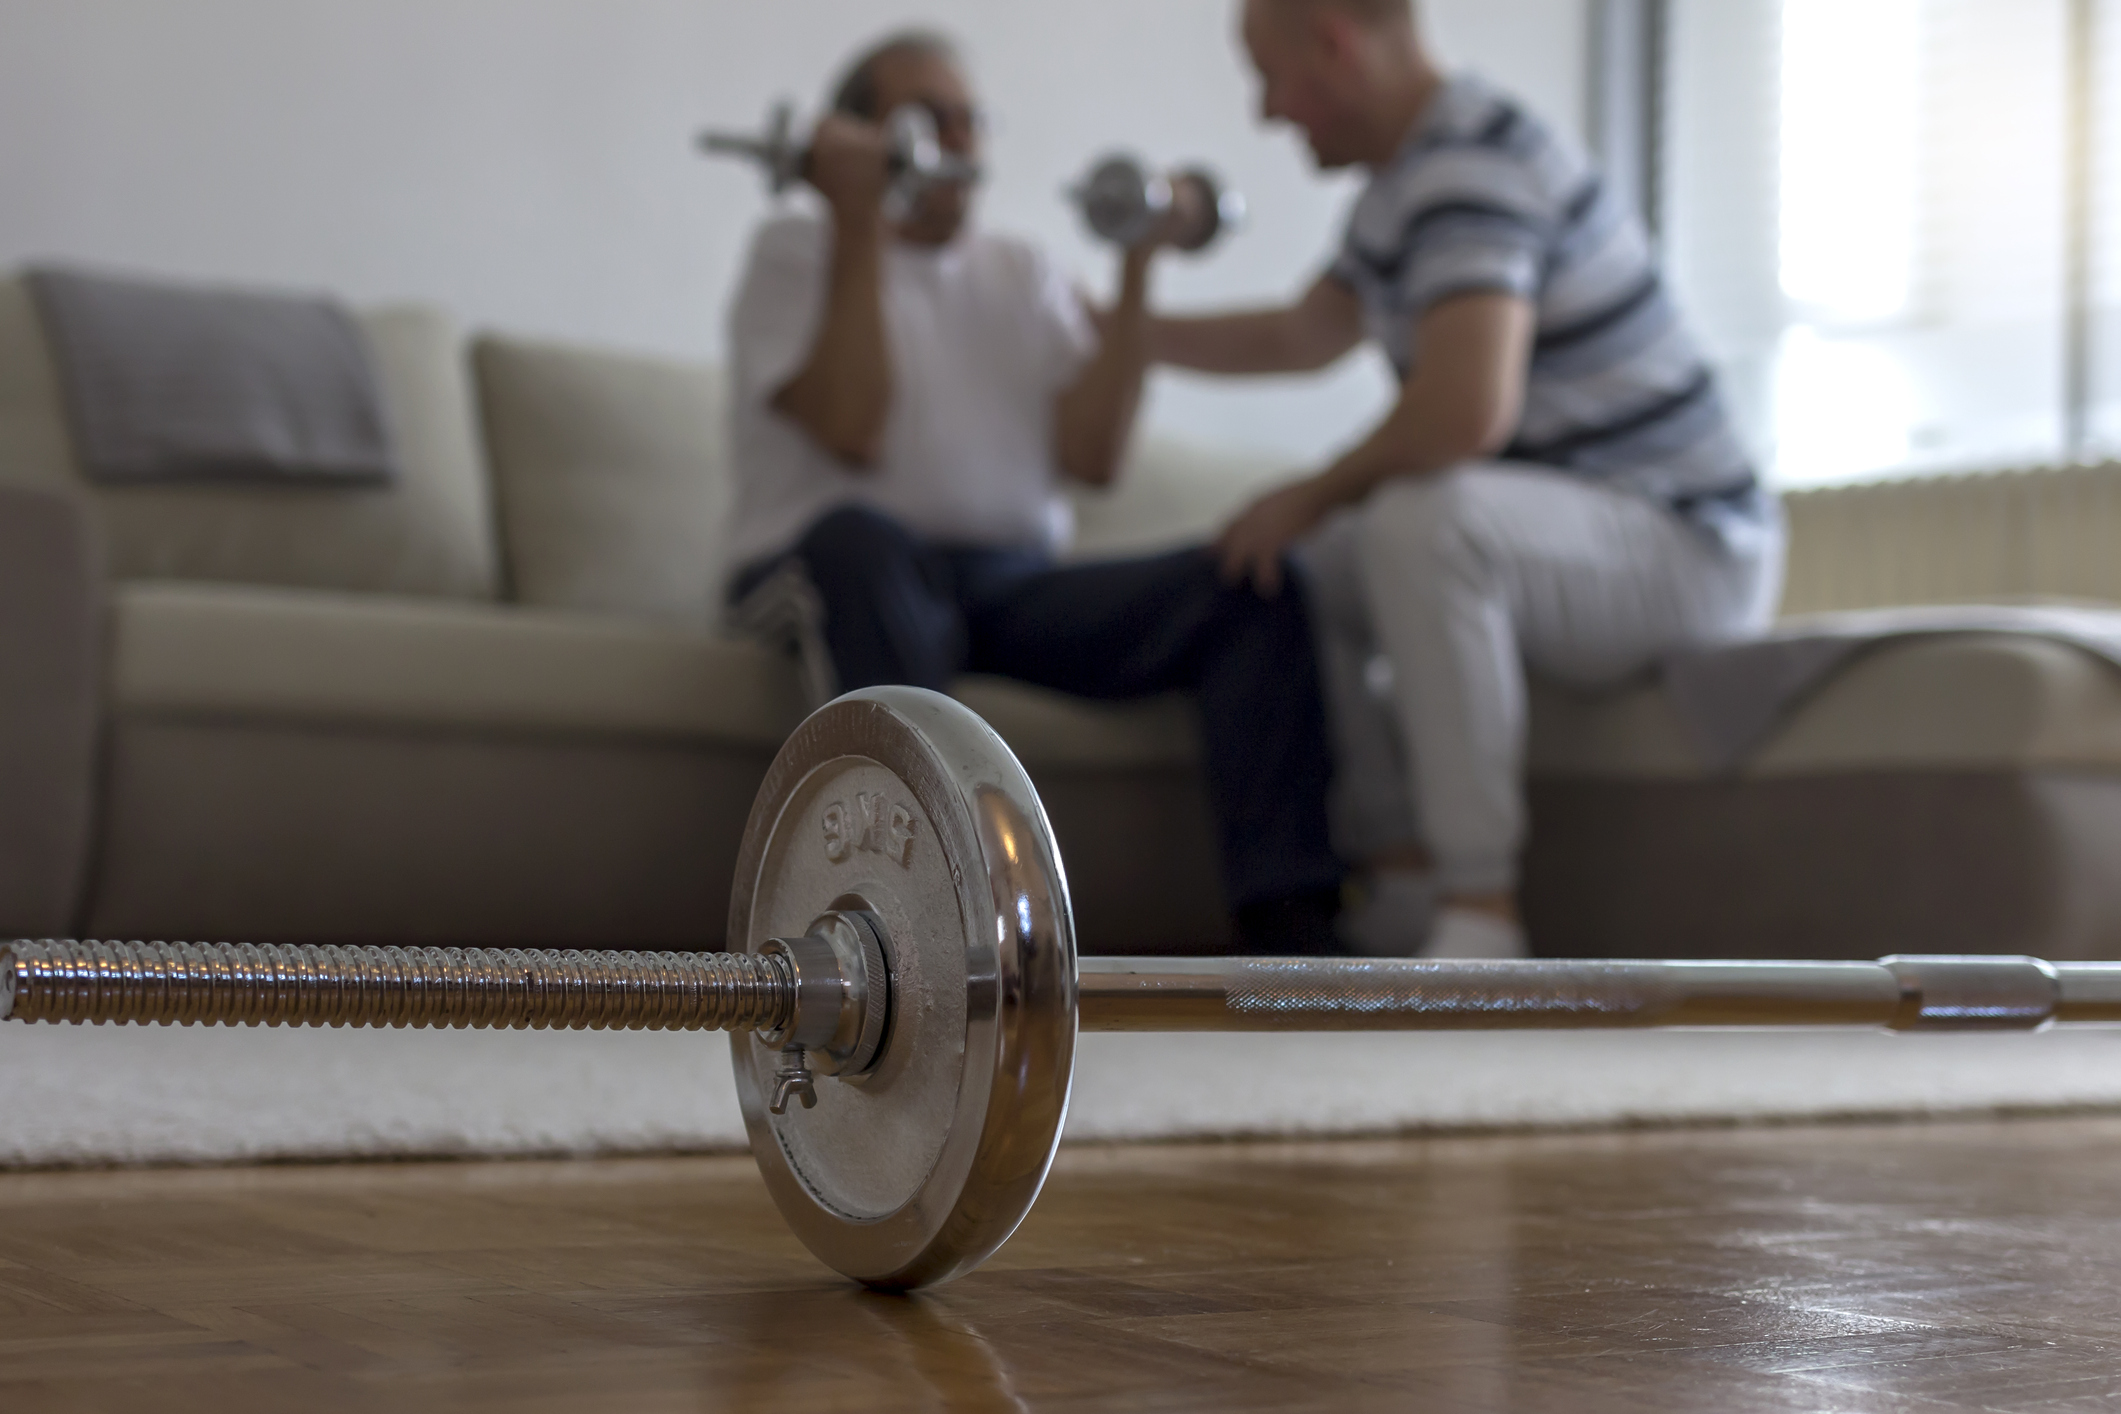 A physical therapist in white sweatpants helps an older man in loose workout clothes through arm strengthening exercises as he recovers from a stroke at home